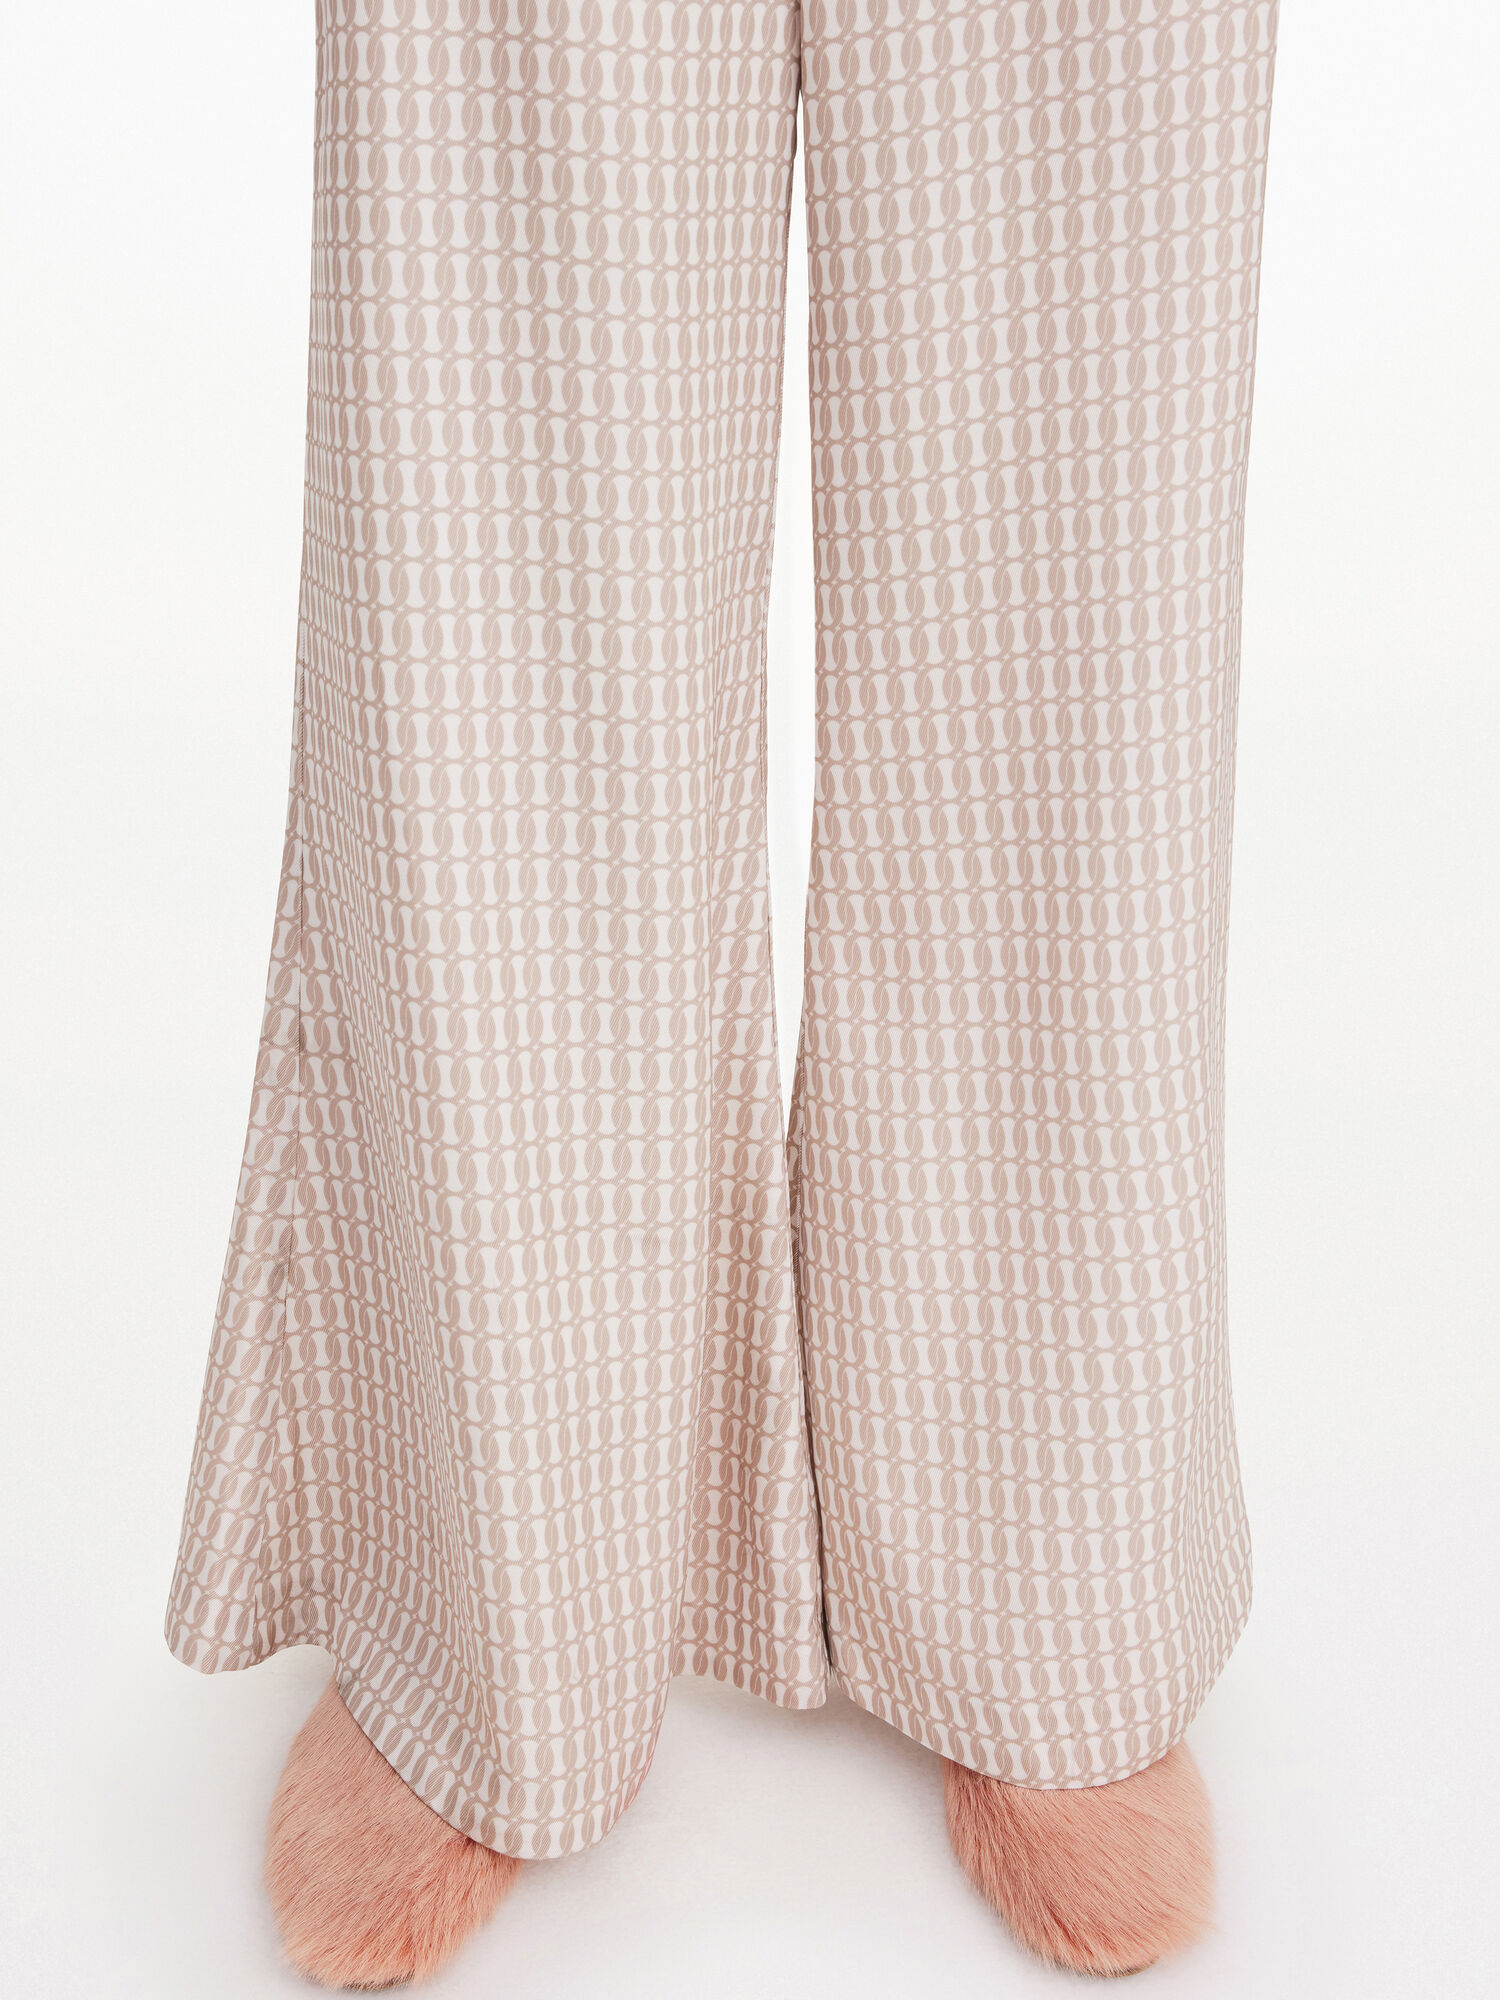 Lucee flared trousers